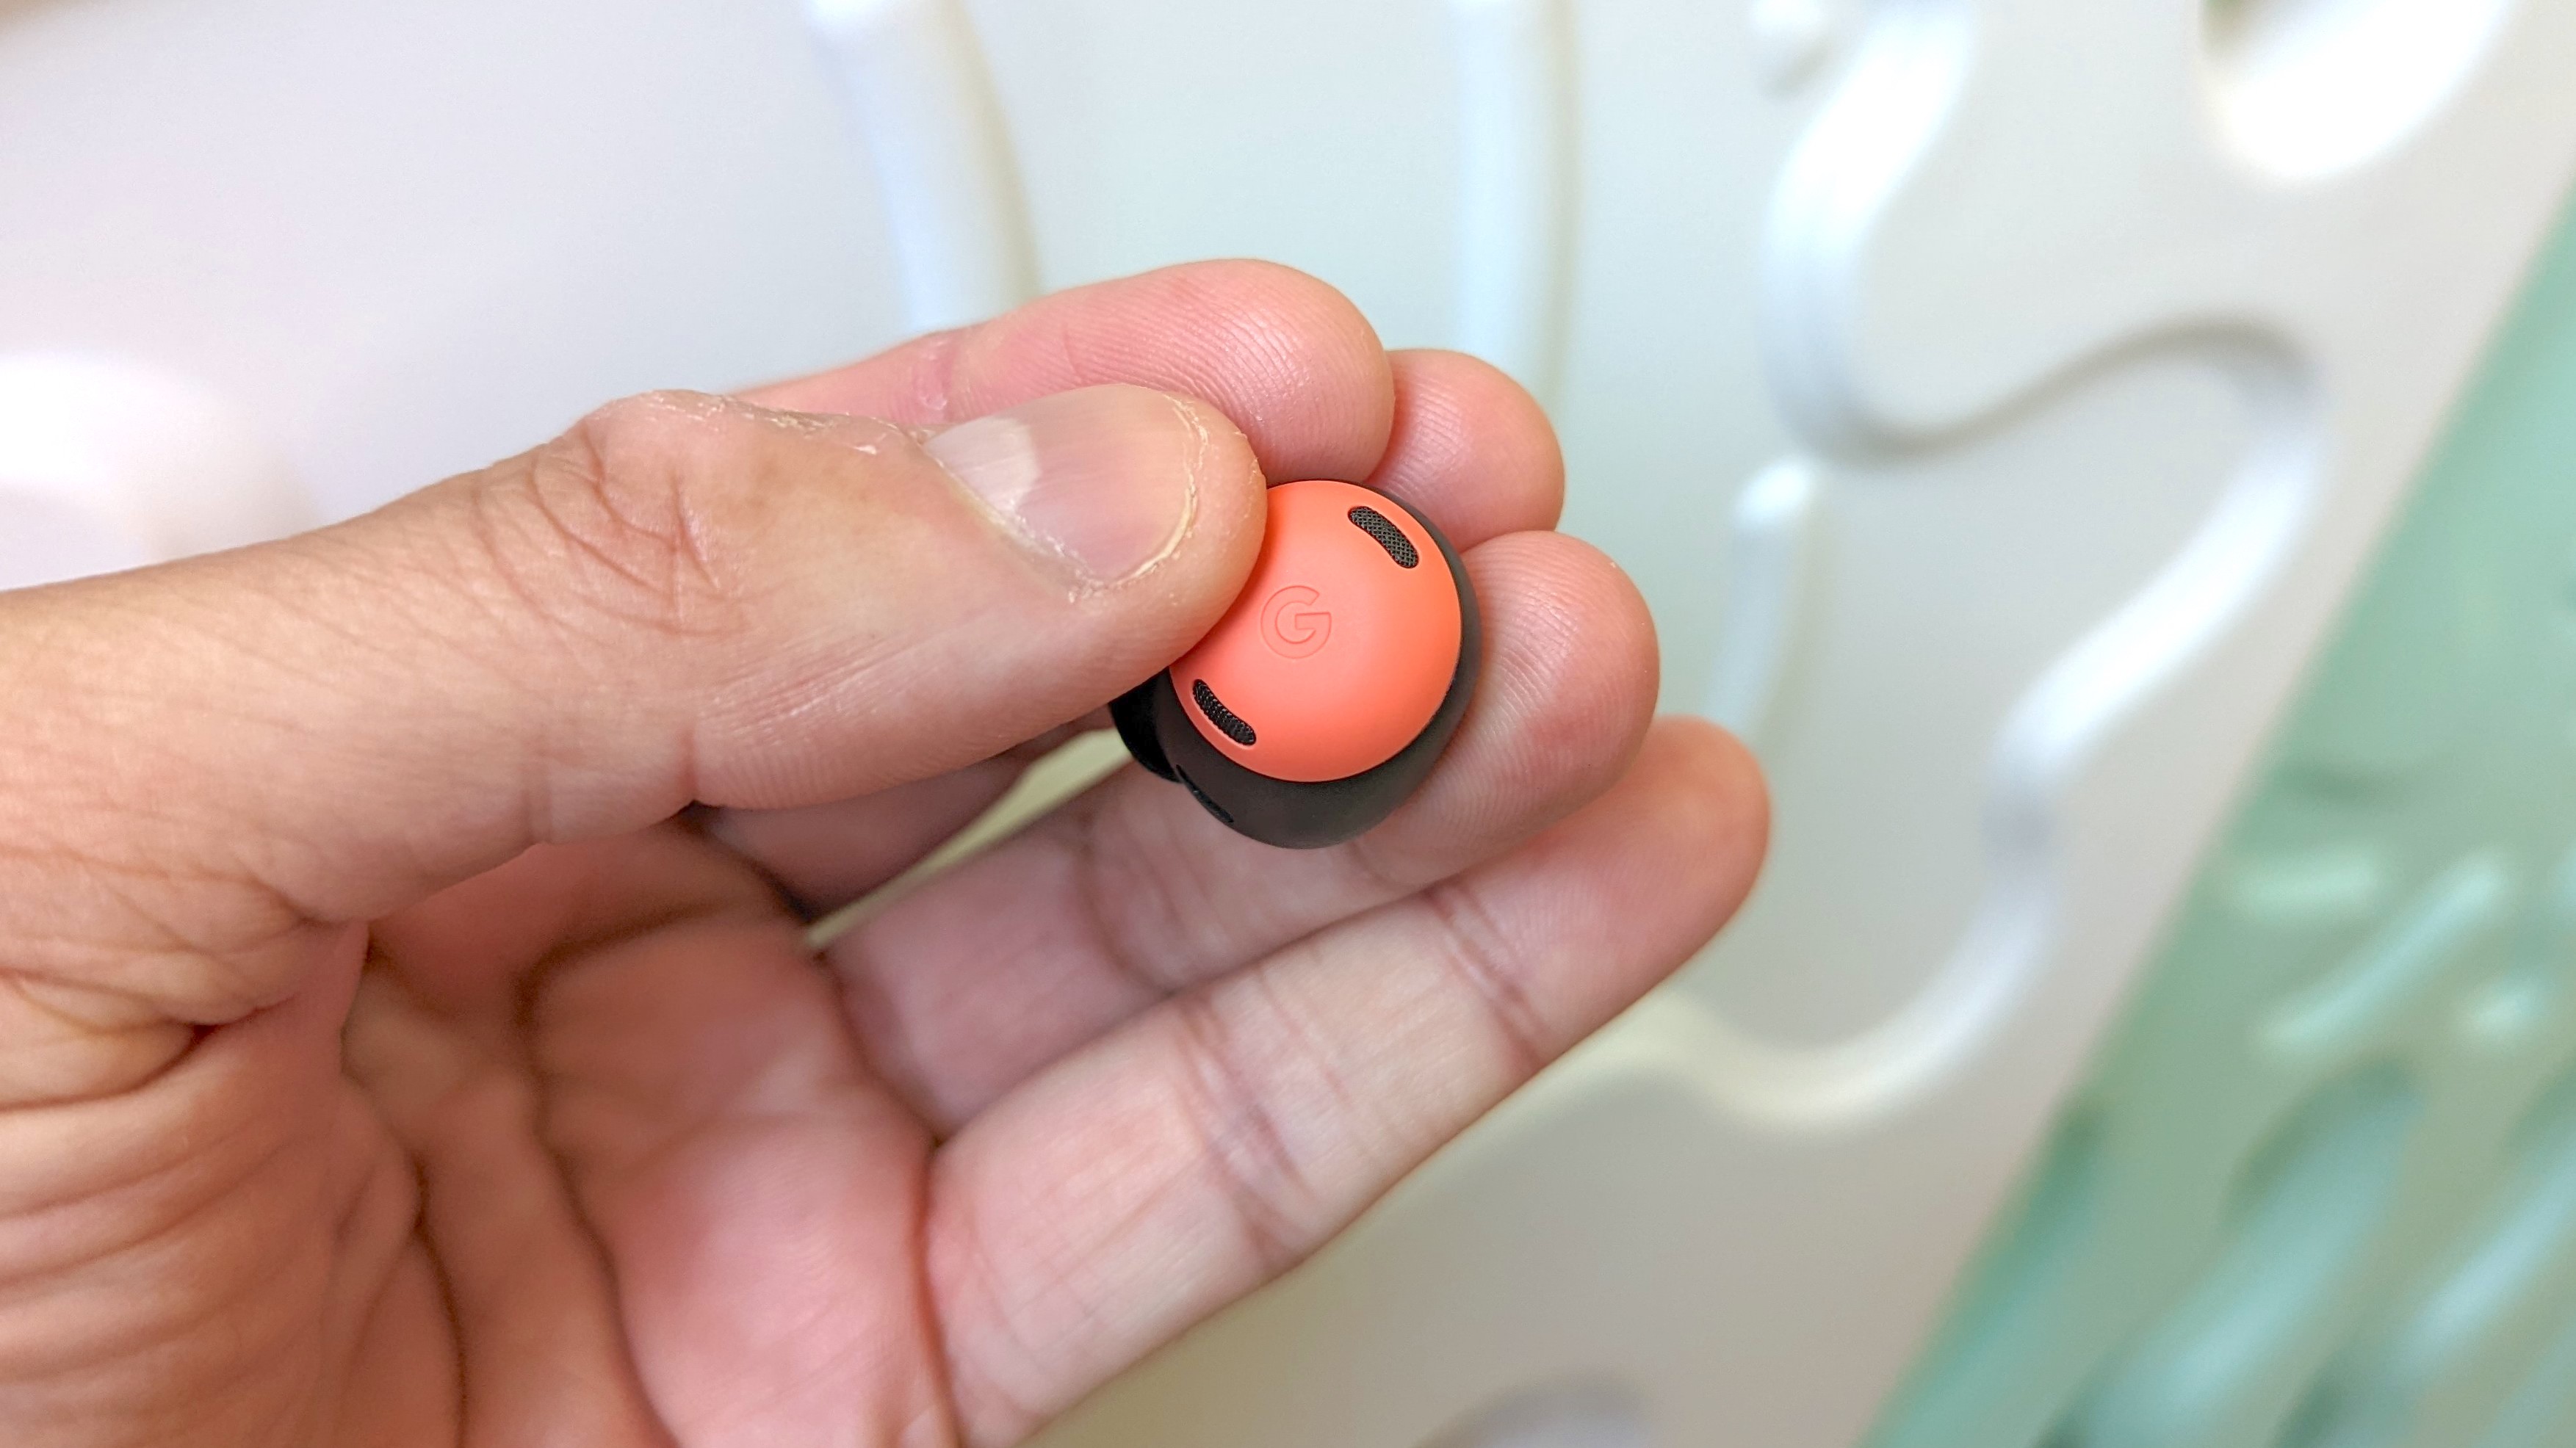 Our reviewer testing the Google Pixel Buds Pro's touch controls